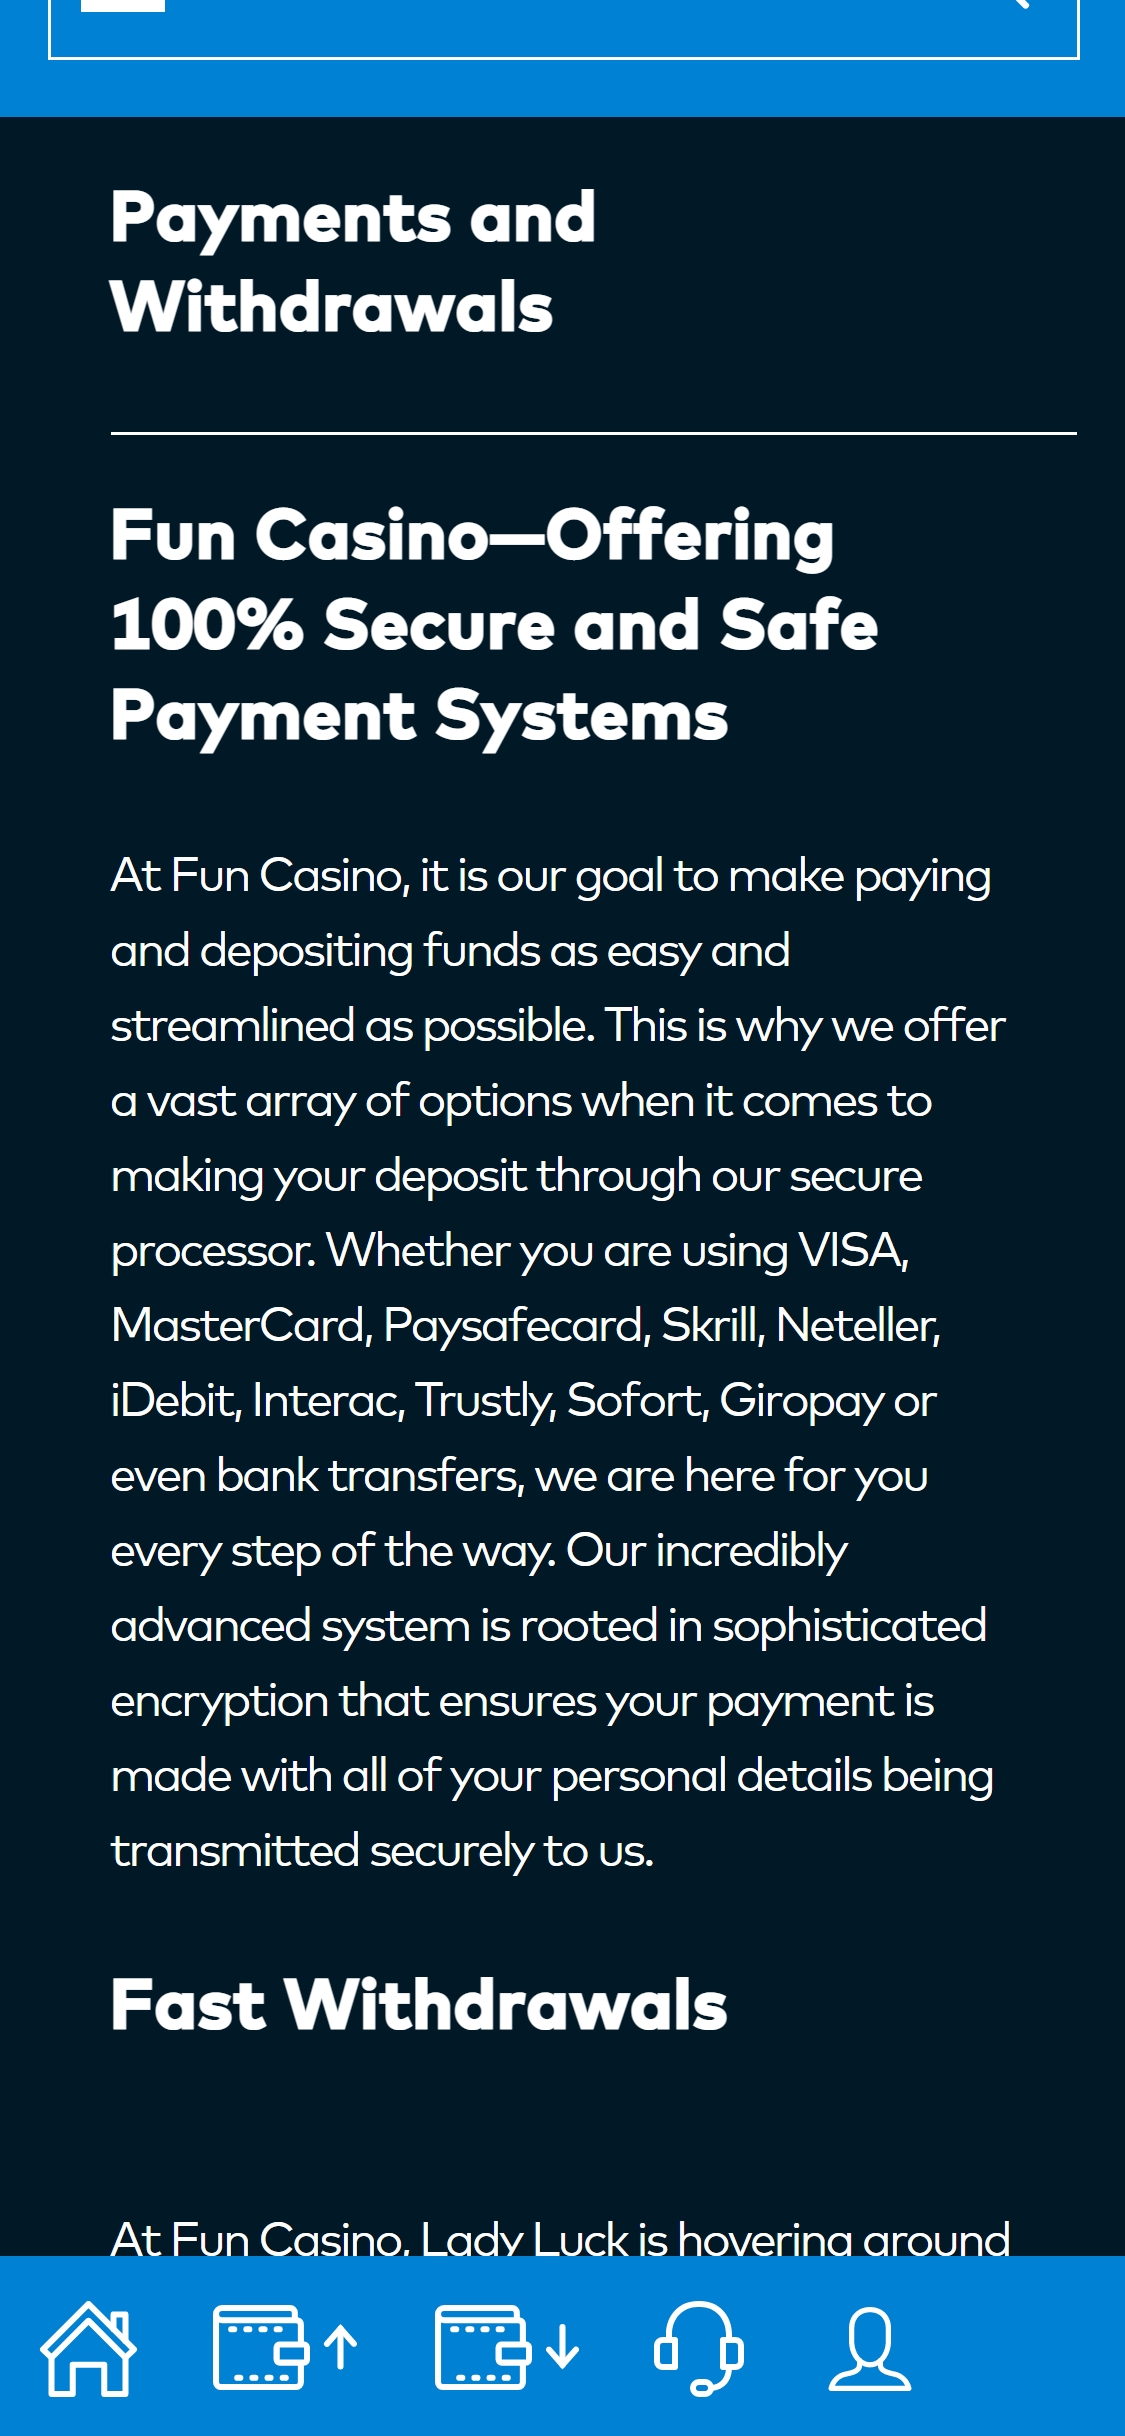 Fun Casino Mobile Payment Methods Review